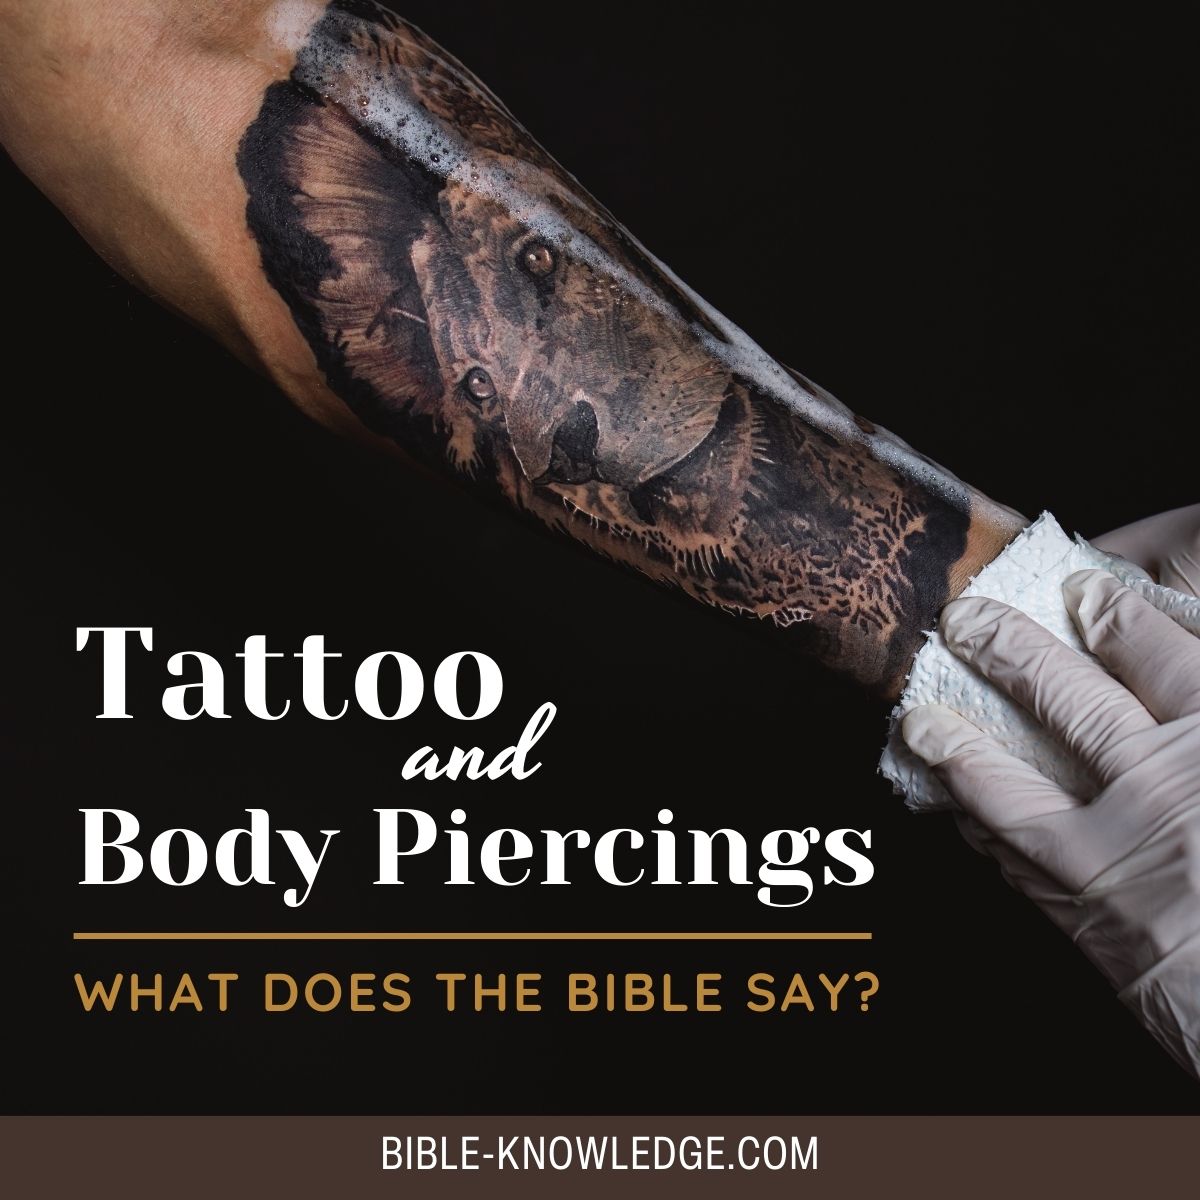 8 Bible verses about Tattoos